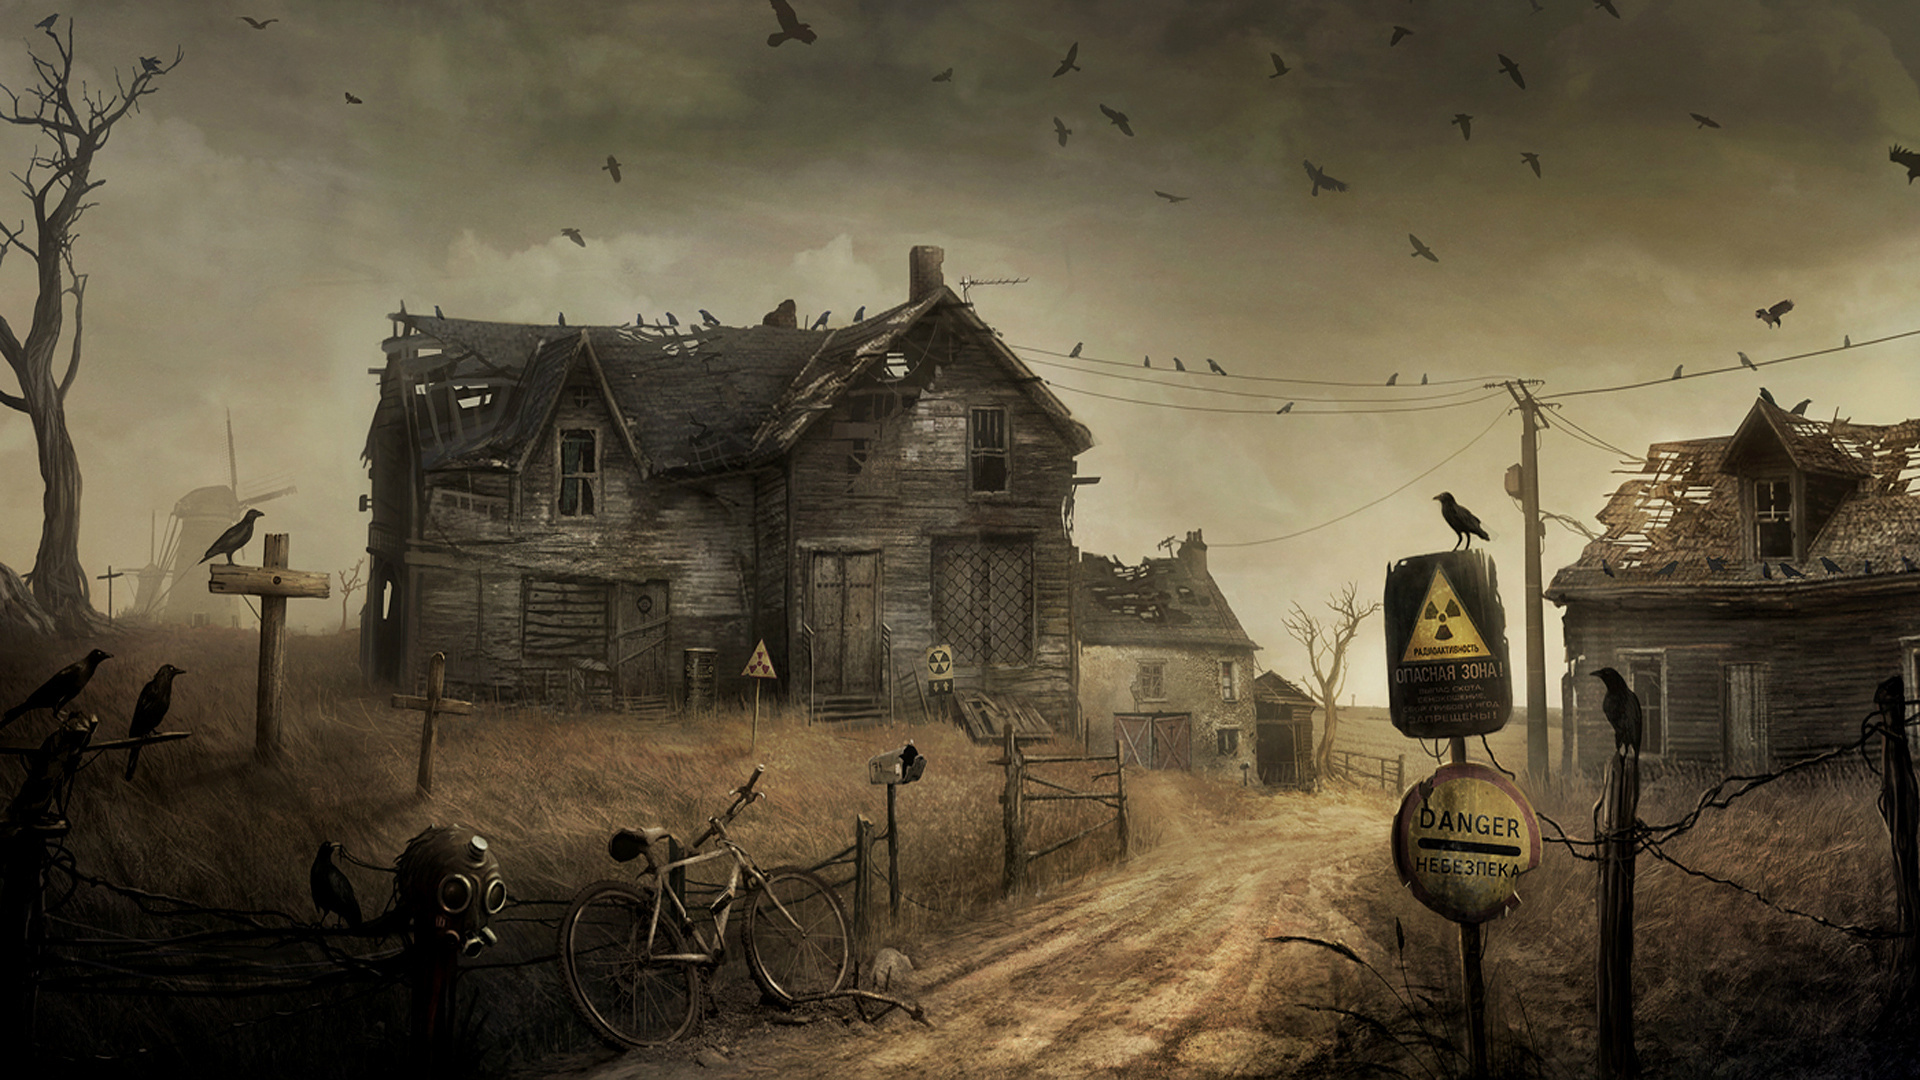 Lovecraftian And Apocalyptic Artwork For Your Linux Desktop